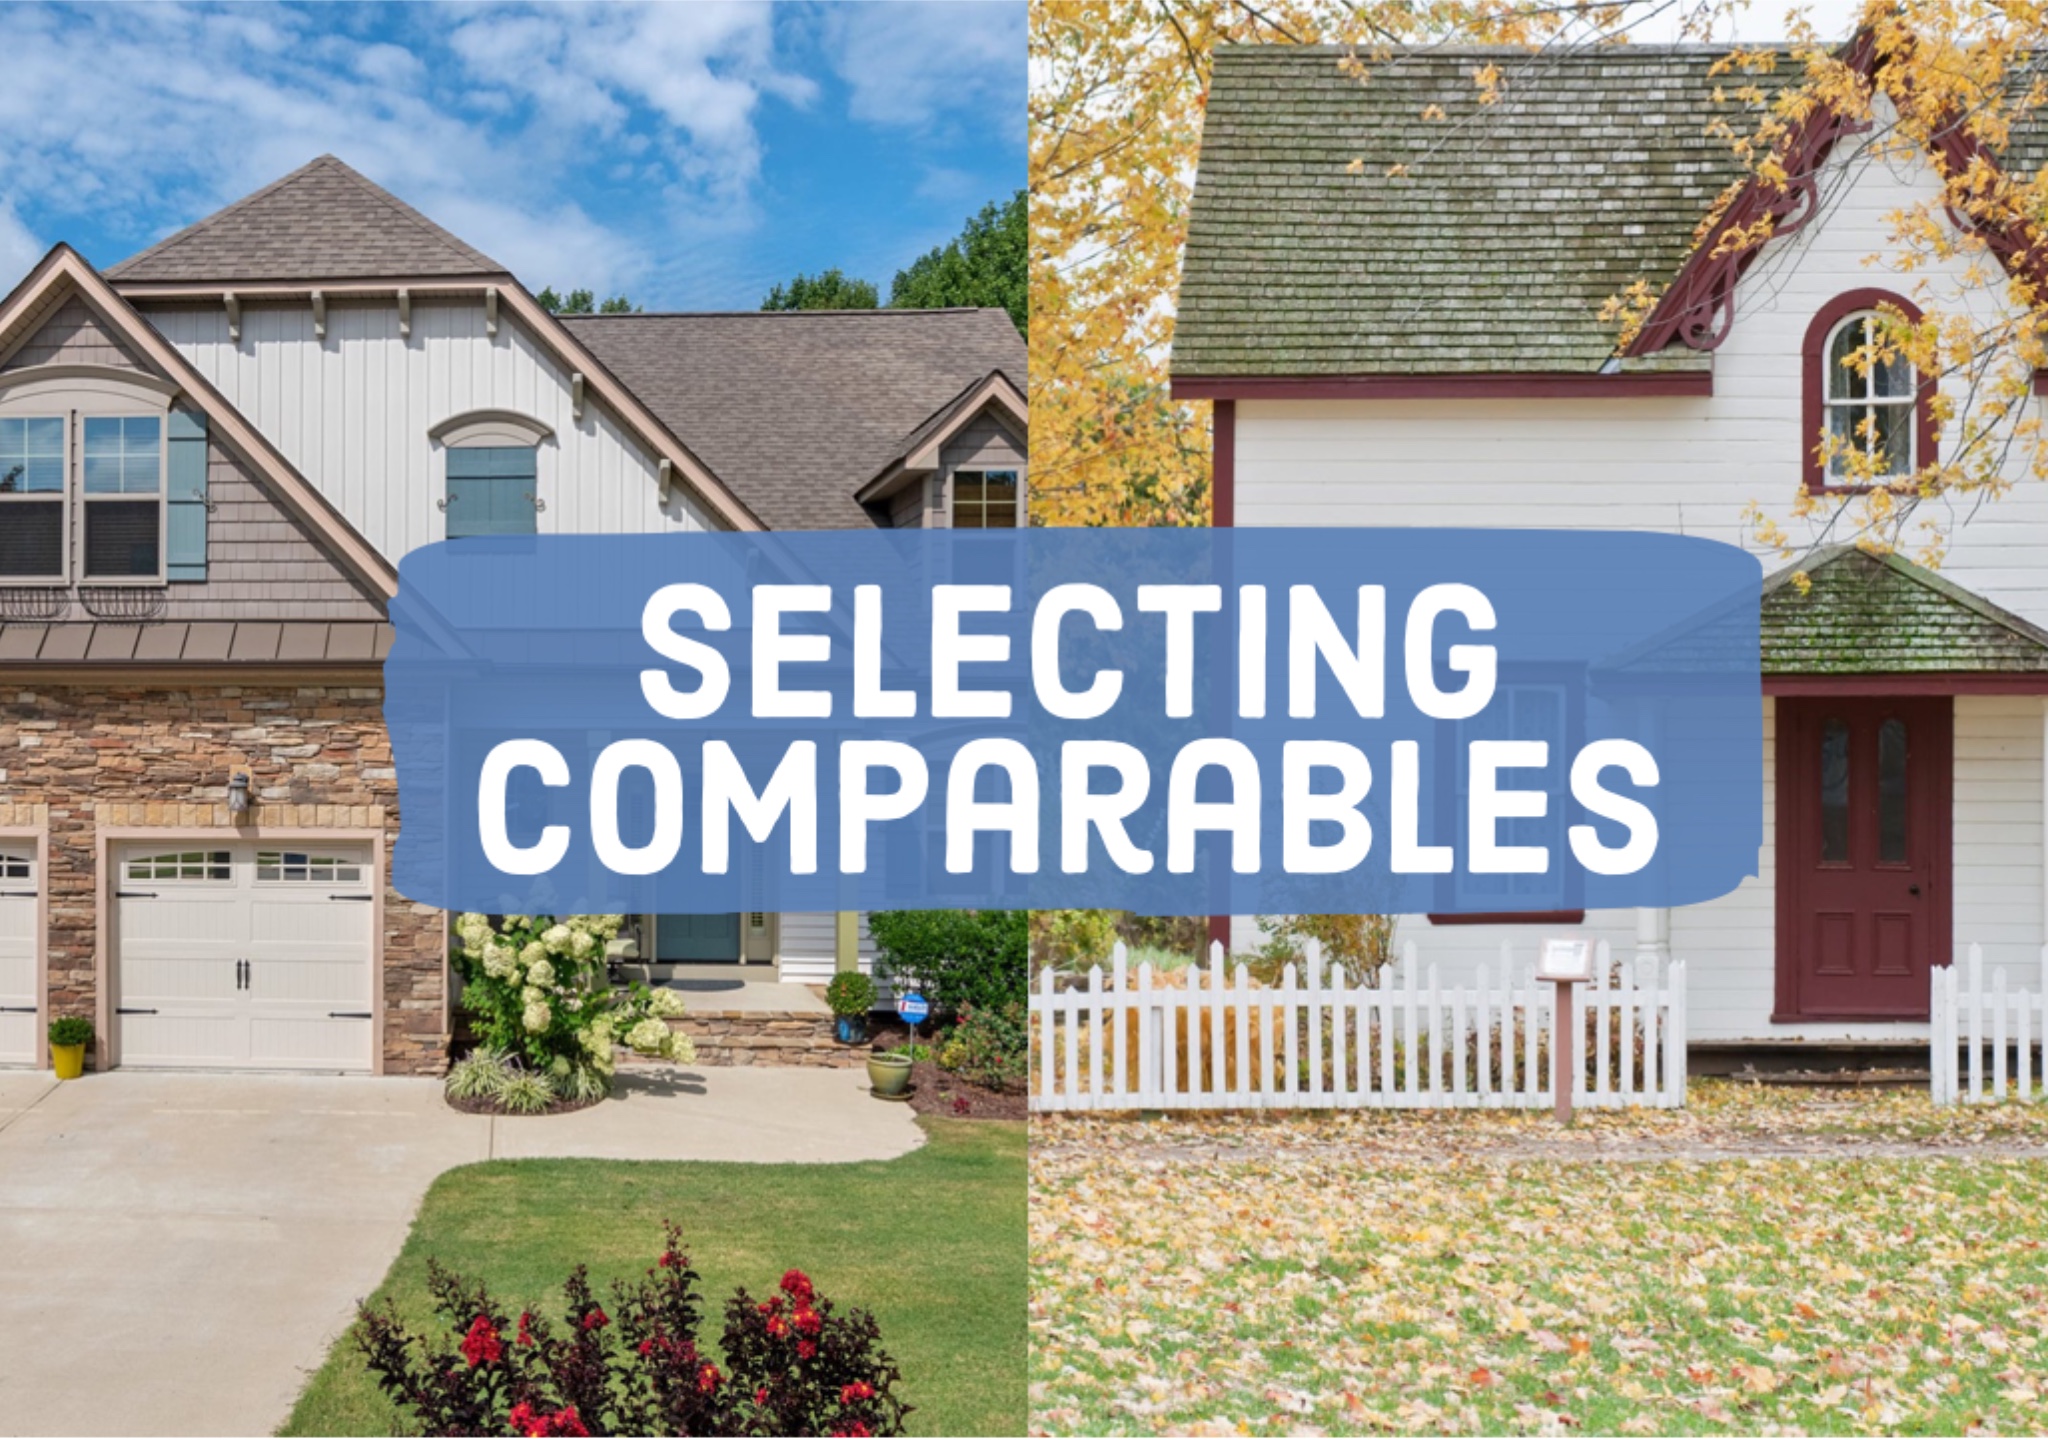 How to Select Good Comparables for Appraisals